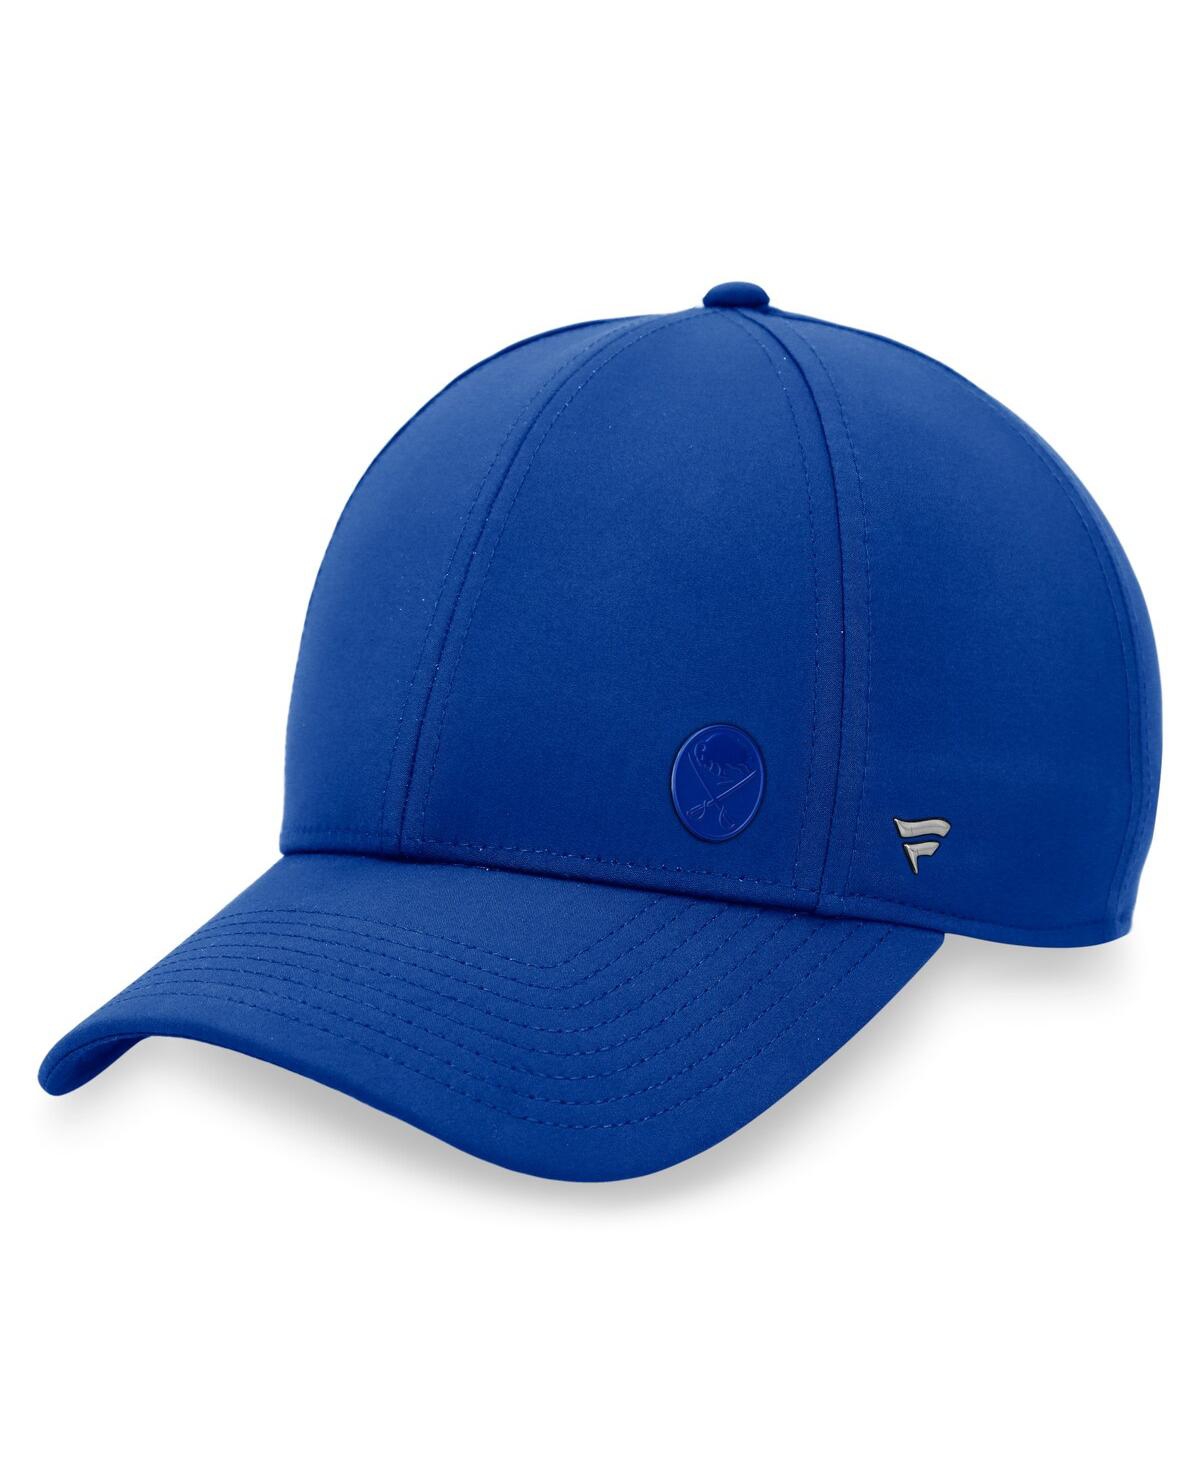 Women's Fanatics Royal Buffalo Sabres Authentic Pro Road Structured Adjustable Hat - Royal